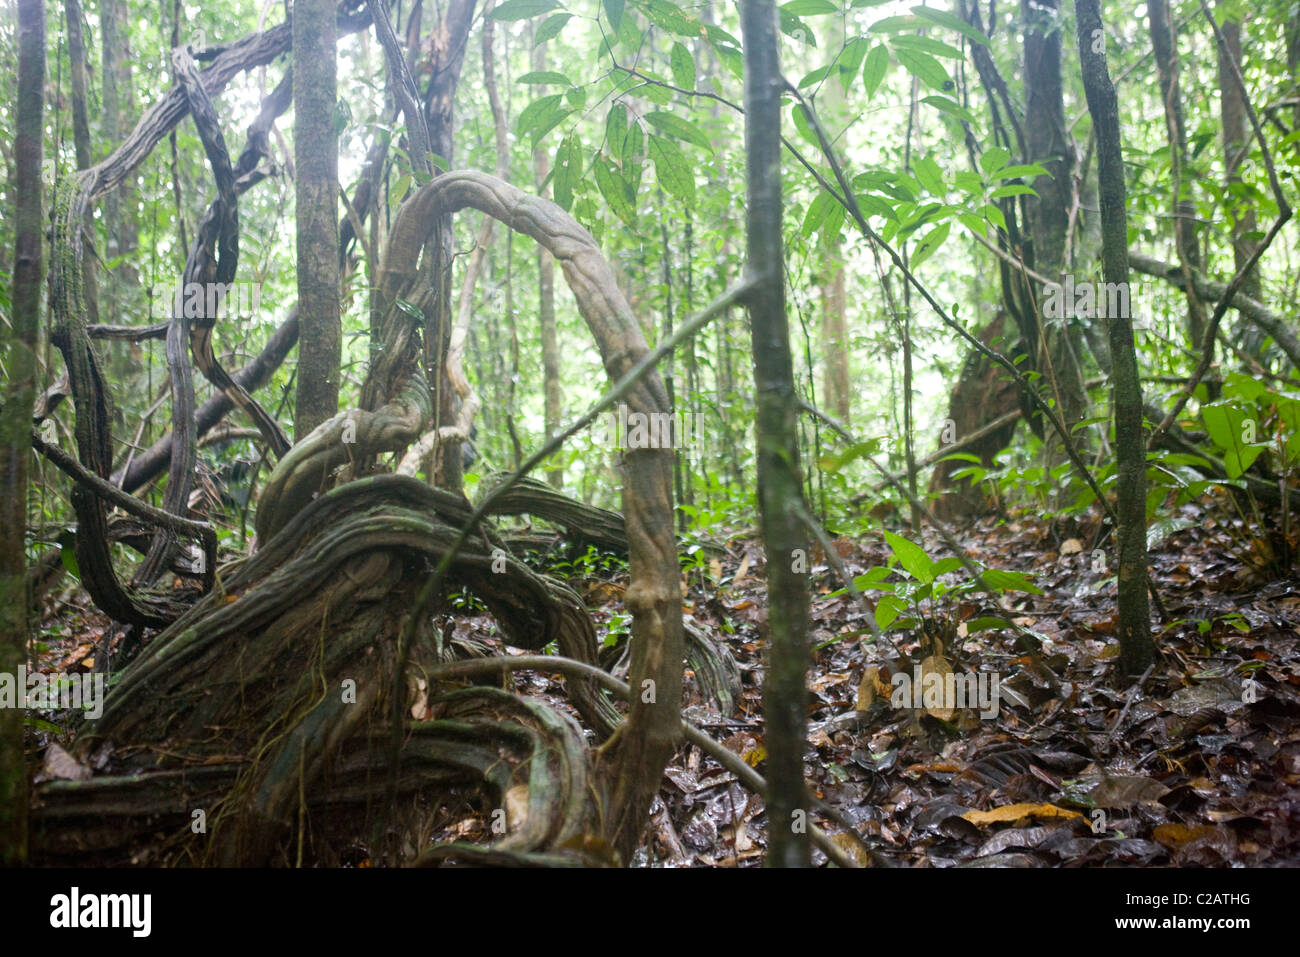 South America, buttress root in Amazon rainforest Stock Photo